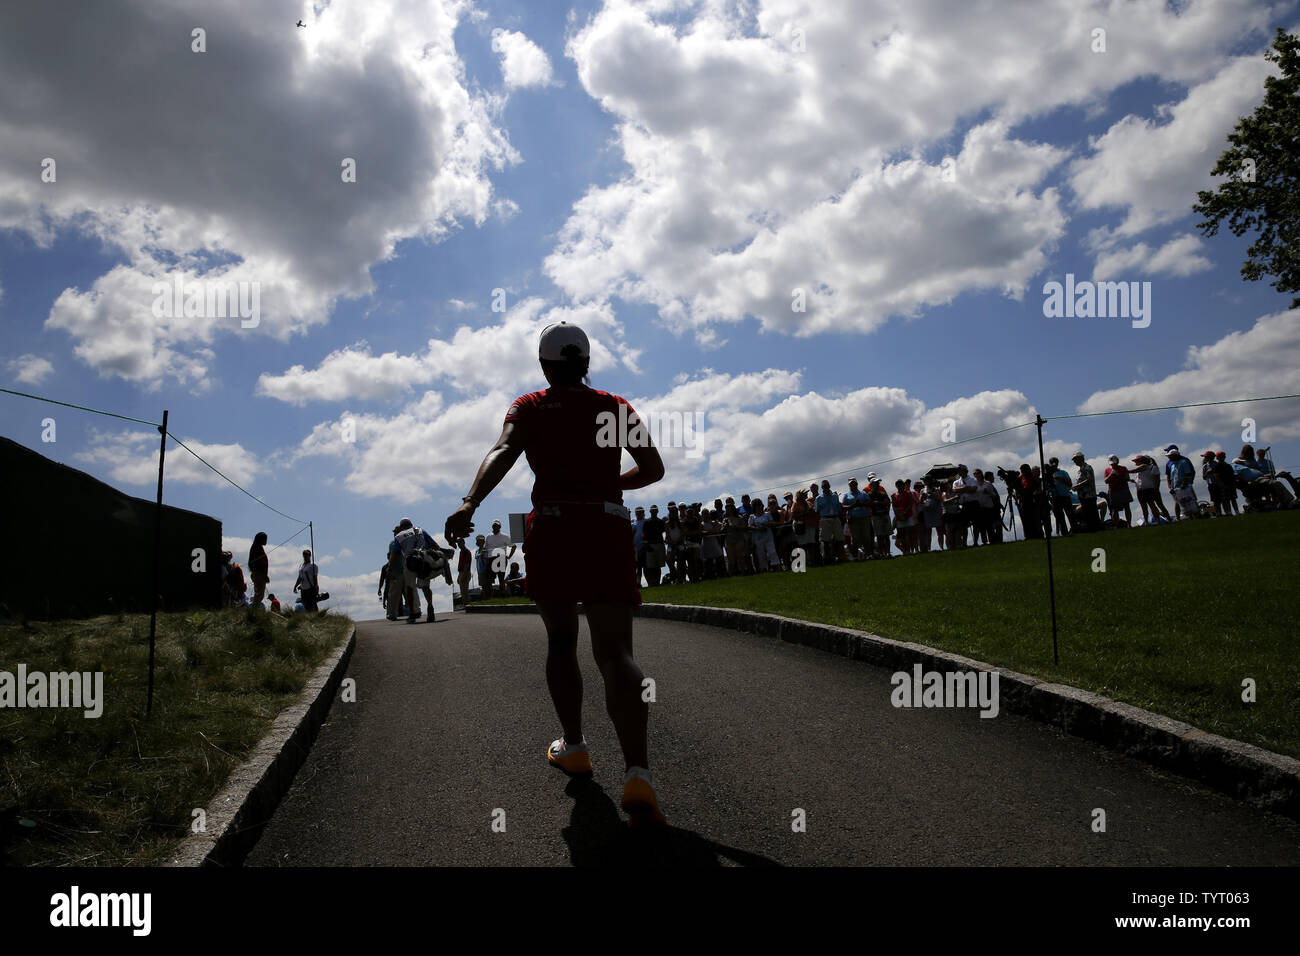 Jin Young Ko of Korea walks to the 10th tee box at Trump National Golf Club after the final round of the LPGA U.S. Women's Open Championship in Bedminster, NJ on July 14, 2017. Sung Hyun Park of South Korea won her first major with a score of 11 under par.      Photo by John Angelillo/UPI Stock Photo